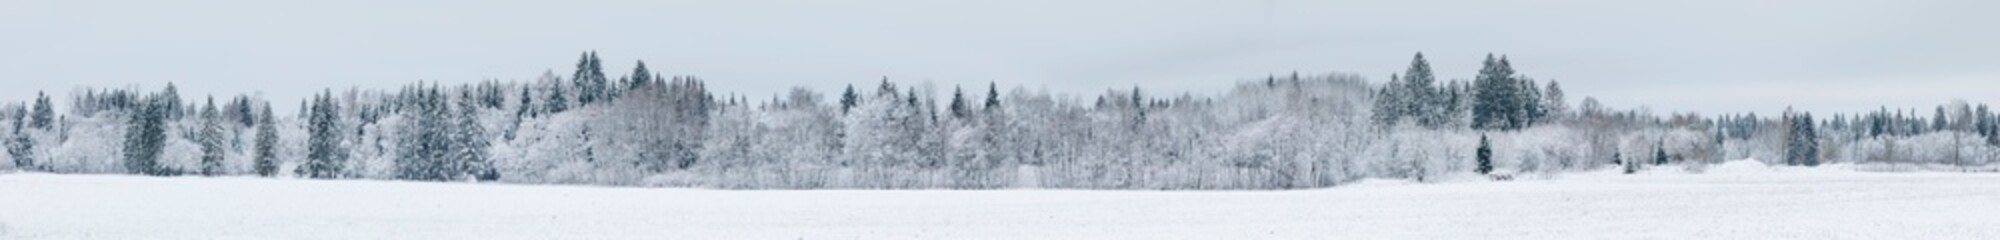 Large panorama of a snowy winter forest panorama landscape